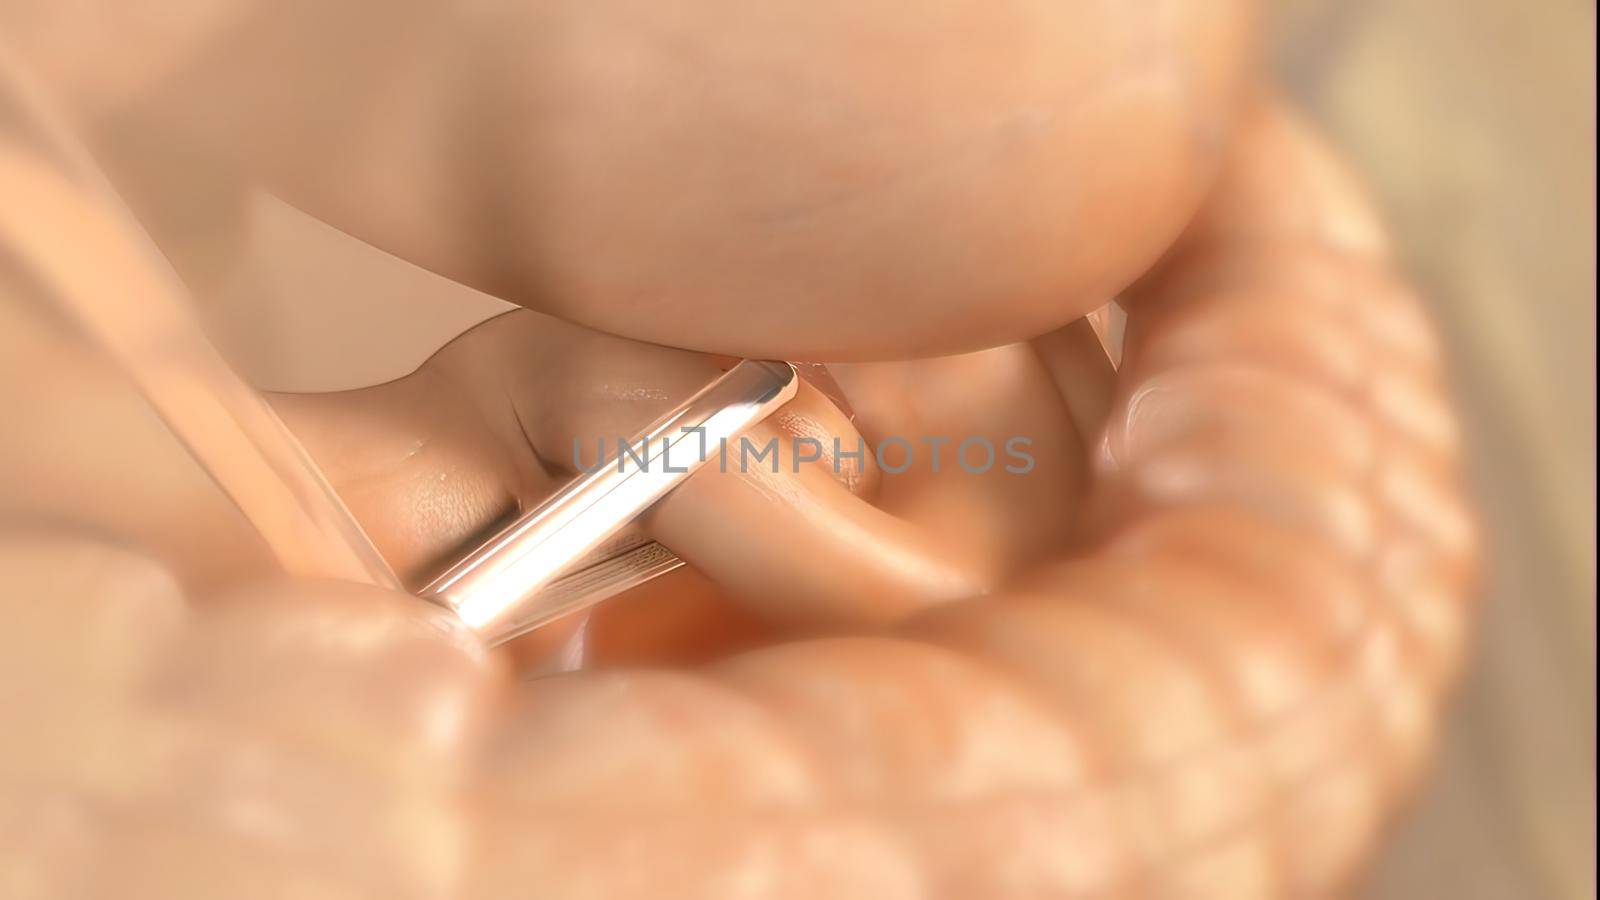 The intestines are a long, continuous tube running from the stomach to the anus. Most absorption of nutrients and water happen in the intestines 3D illustration